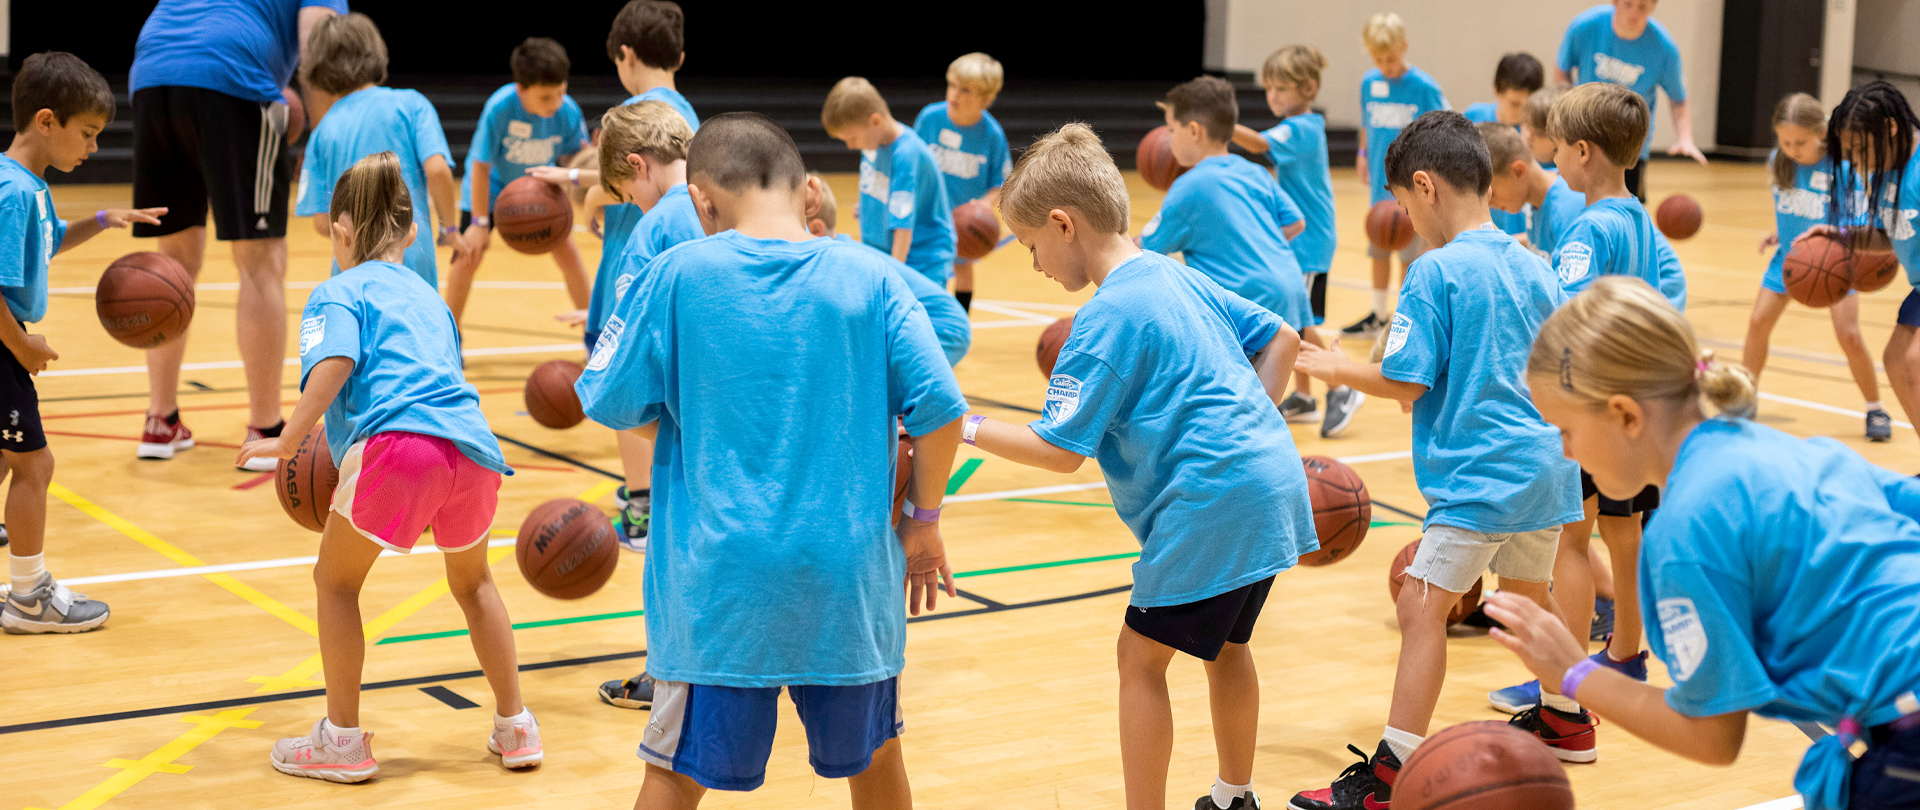 Youth Basketball
CHAMP leagues for ages 5–18
Winter Season: Nov 2022–Feb 2023
Register now!
